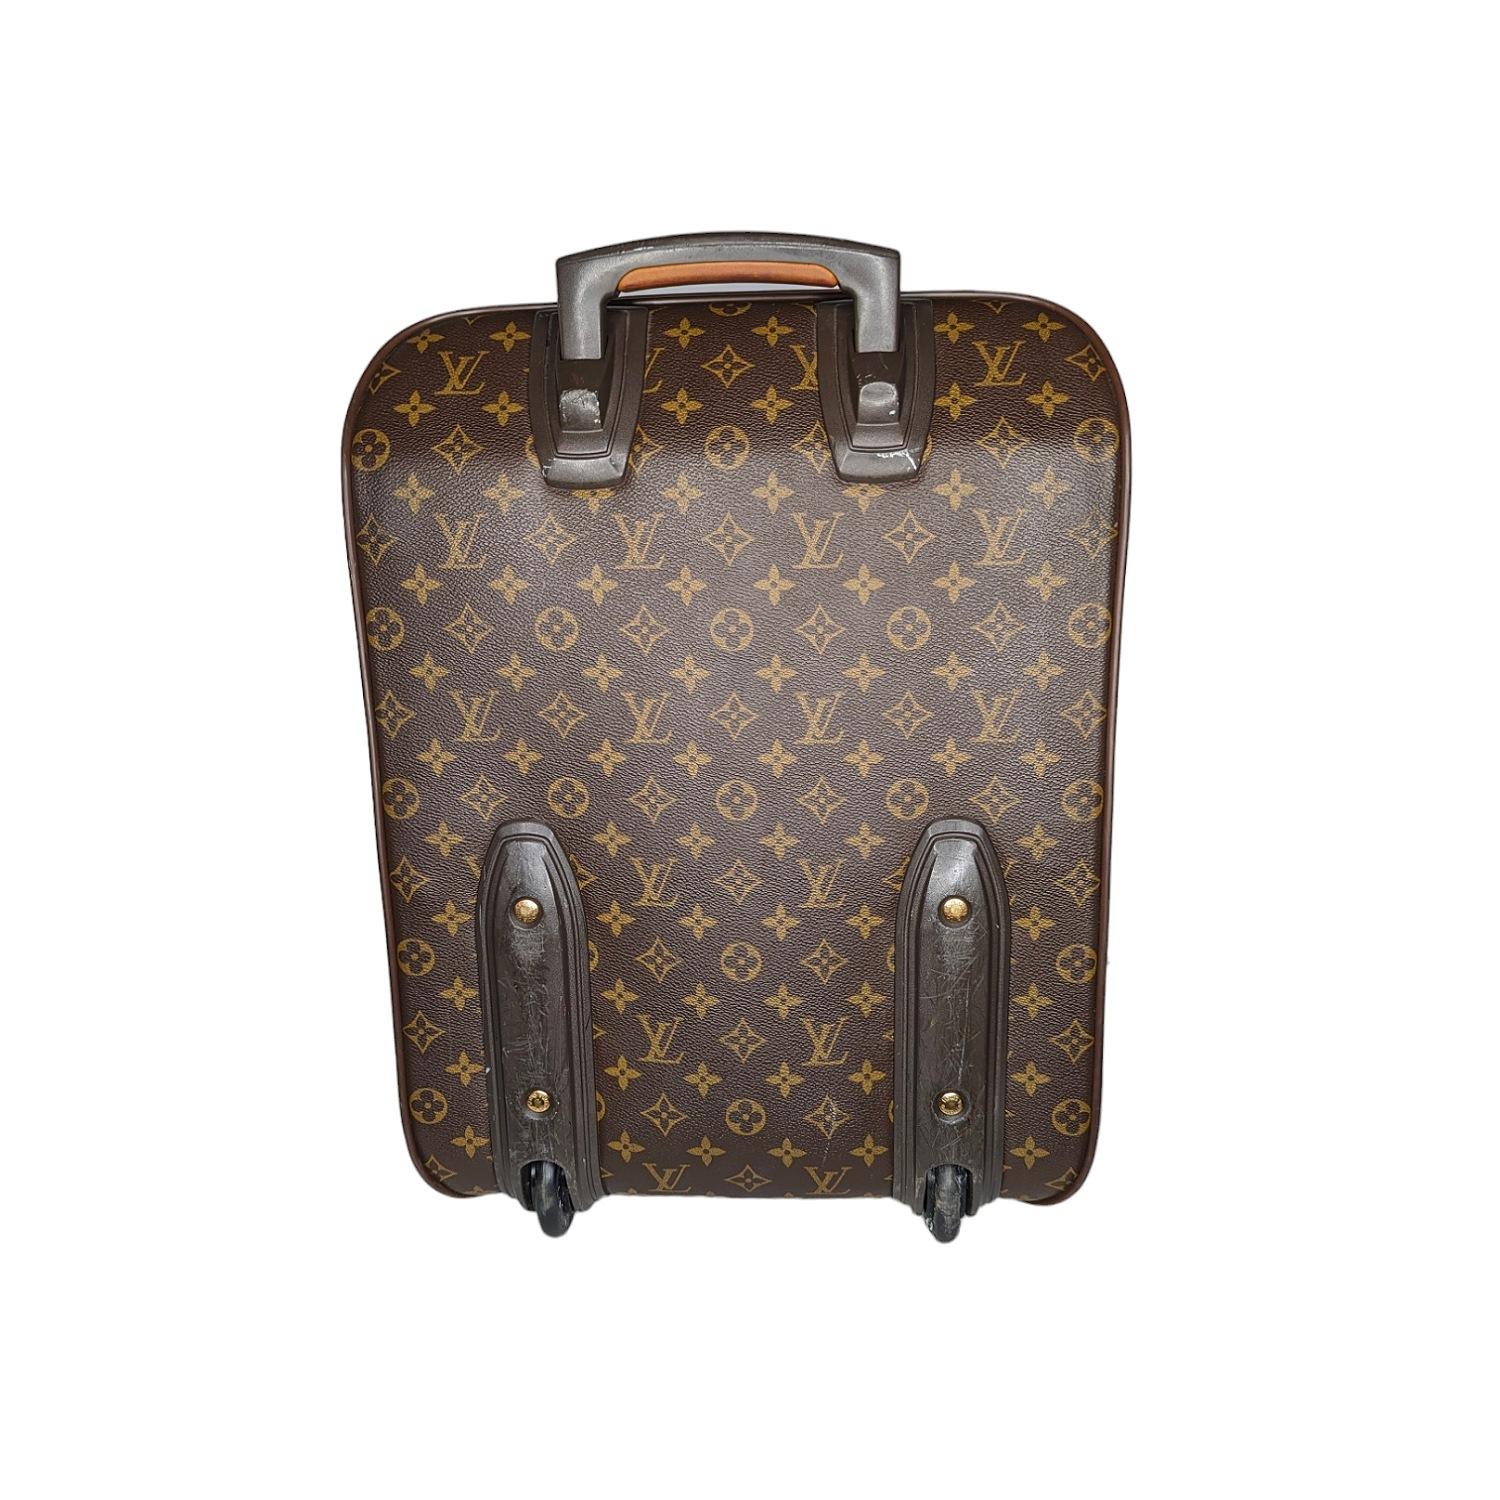 This stylish suitcase is finely crafted of classic Louis Vuitton monogram coated canvas. The bag features a deep front pocket with a hidden zipper compartment, vachetta cowhide leather trim, a reinforced top handle, a telescopic handle, a wheeled